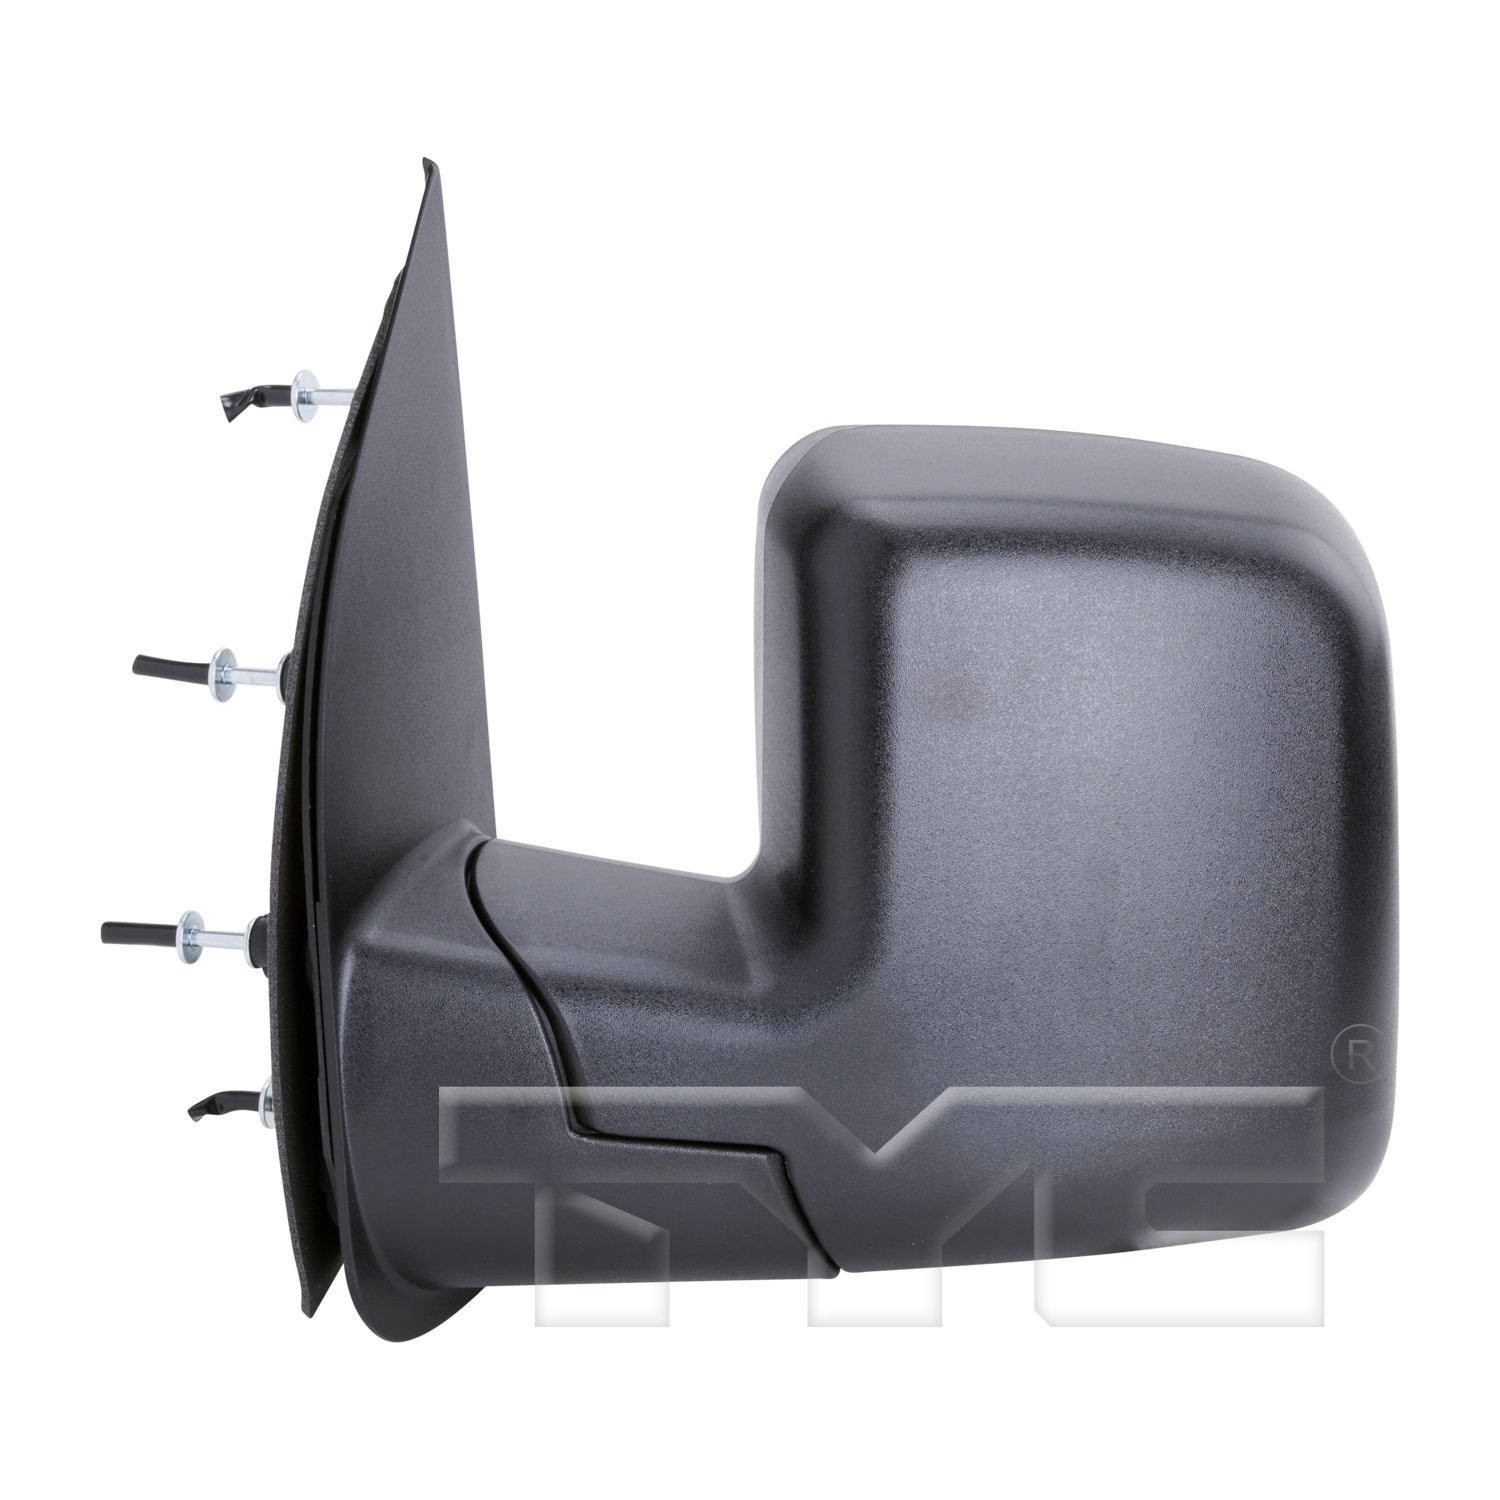 Aftermarket MIRRORS for FORD - E-150 ECONOLINE CLUB WAGON, E-150 ECONOLINE CLUB WAGON,02-02,LT Mirror outside rear view